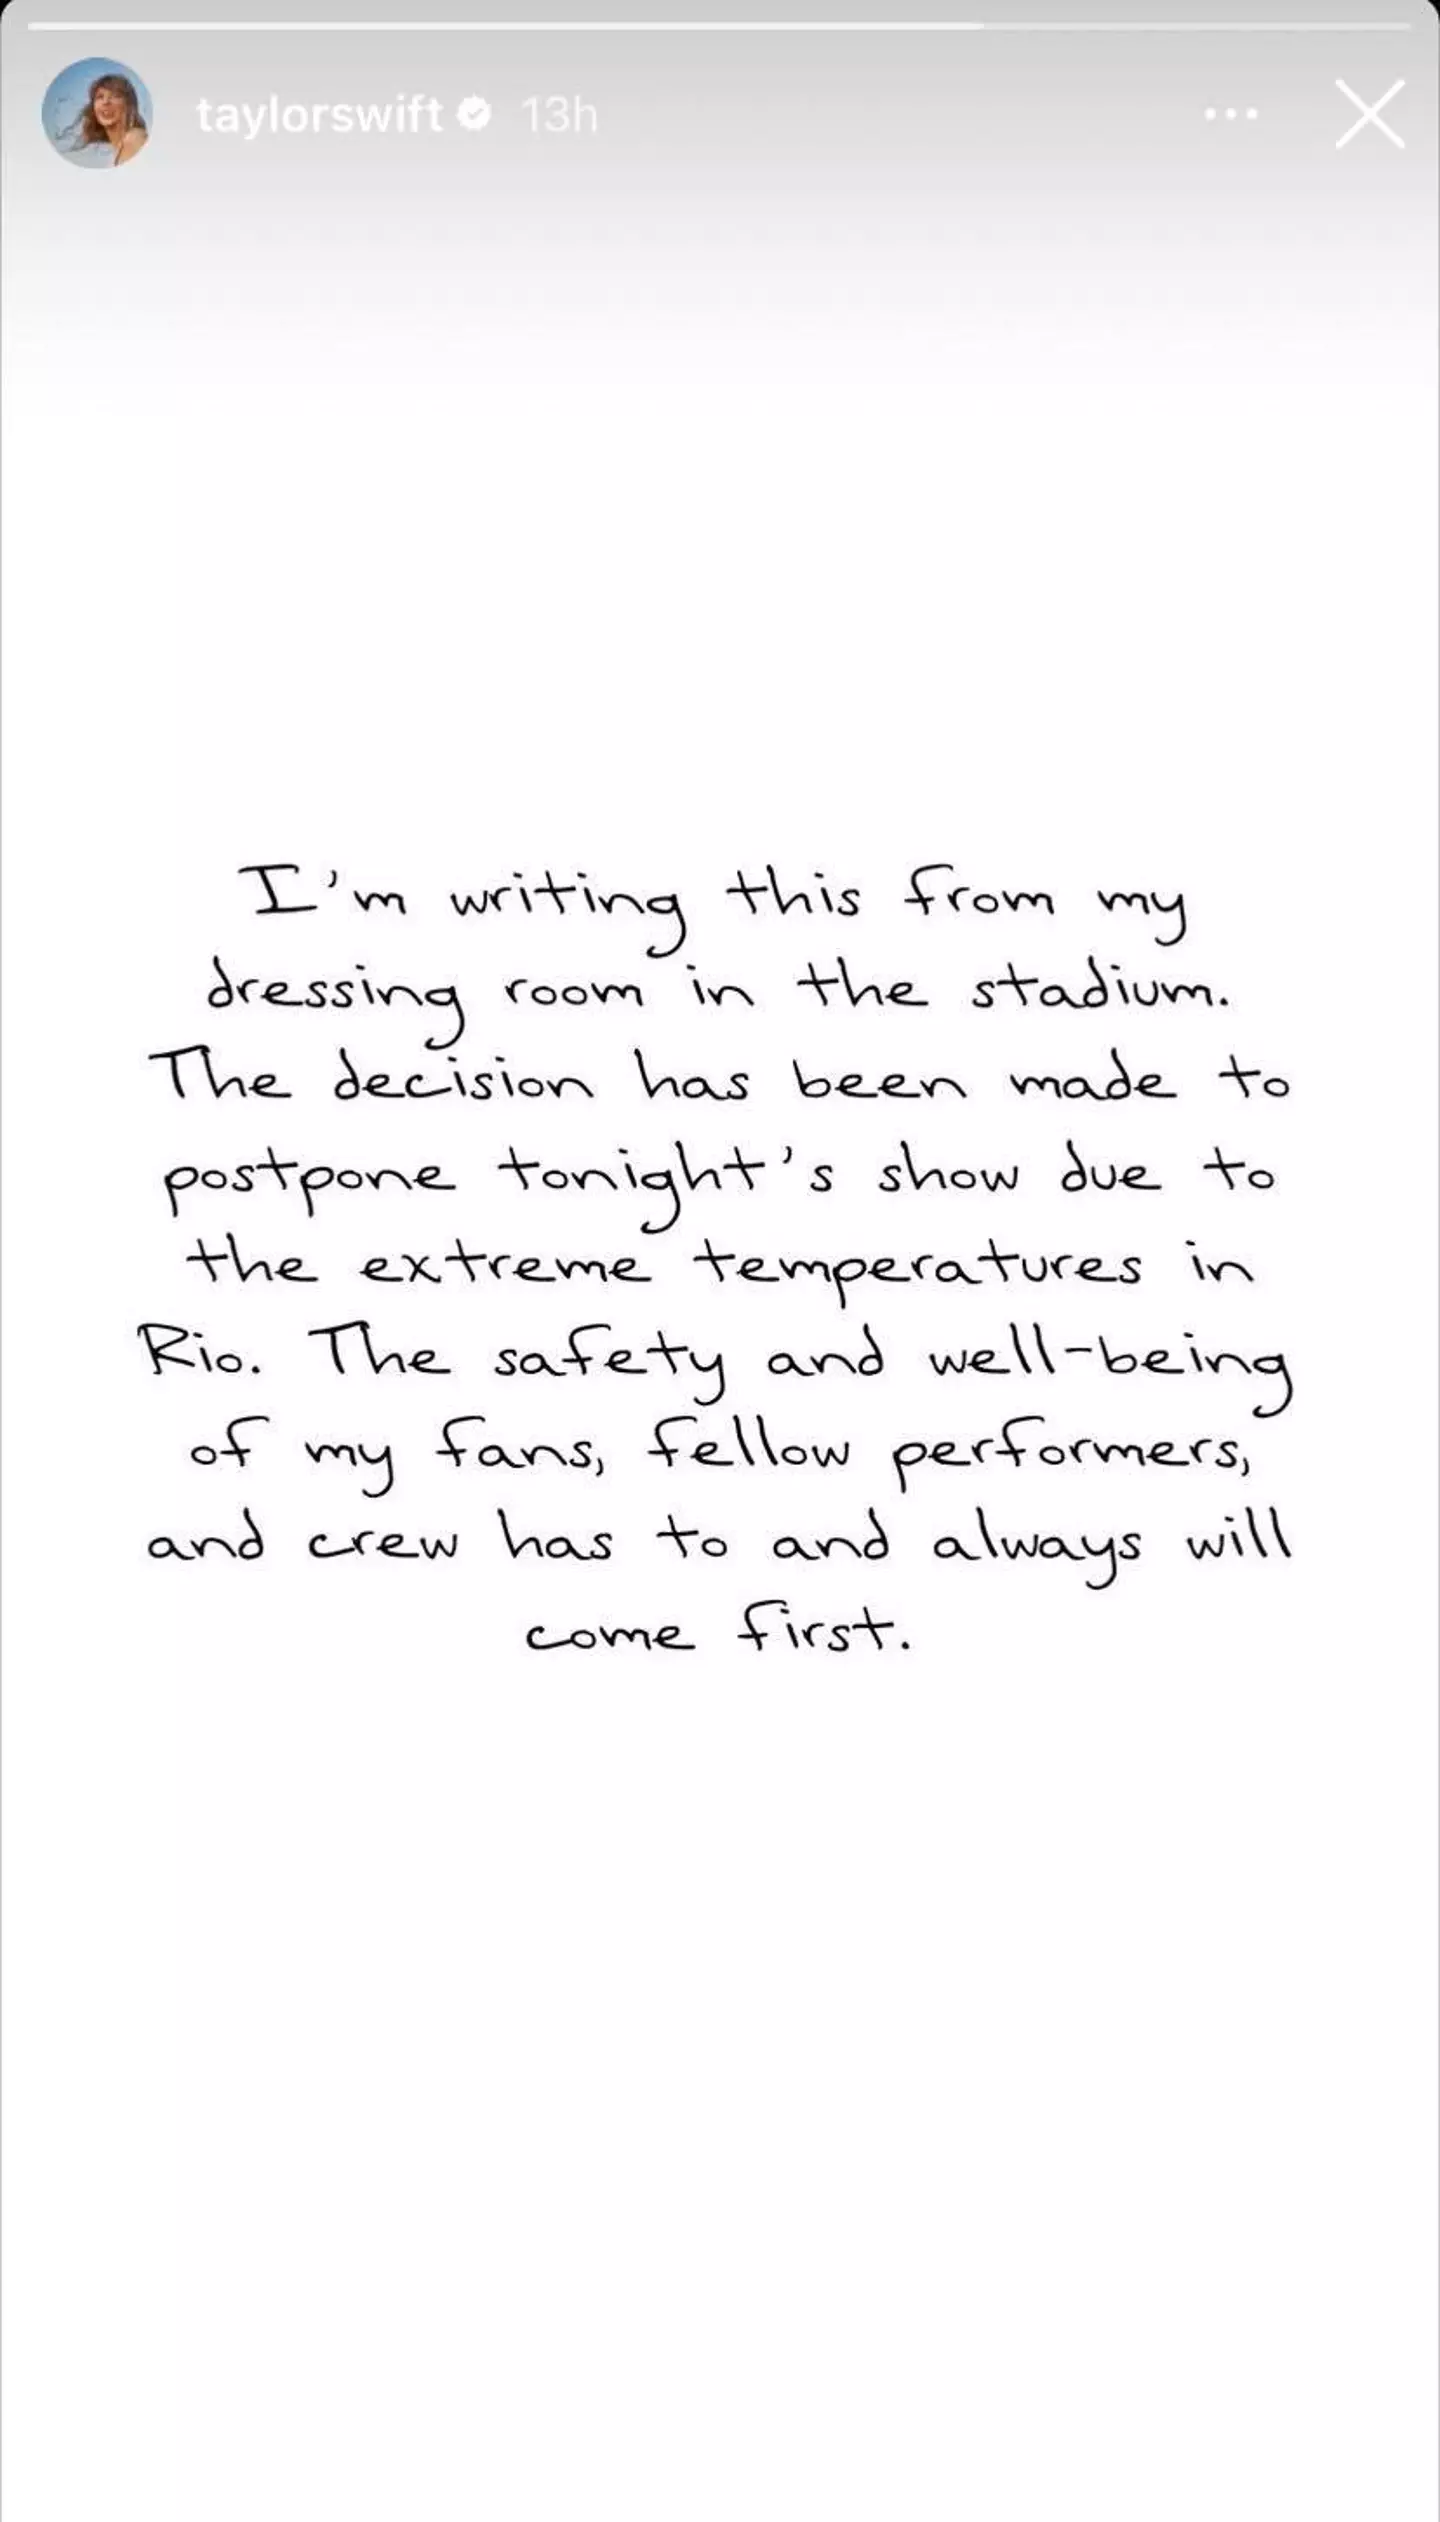 Taylor Swift explained that the concert had been postponed.